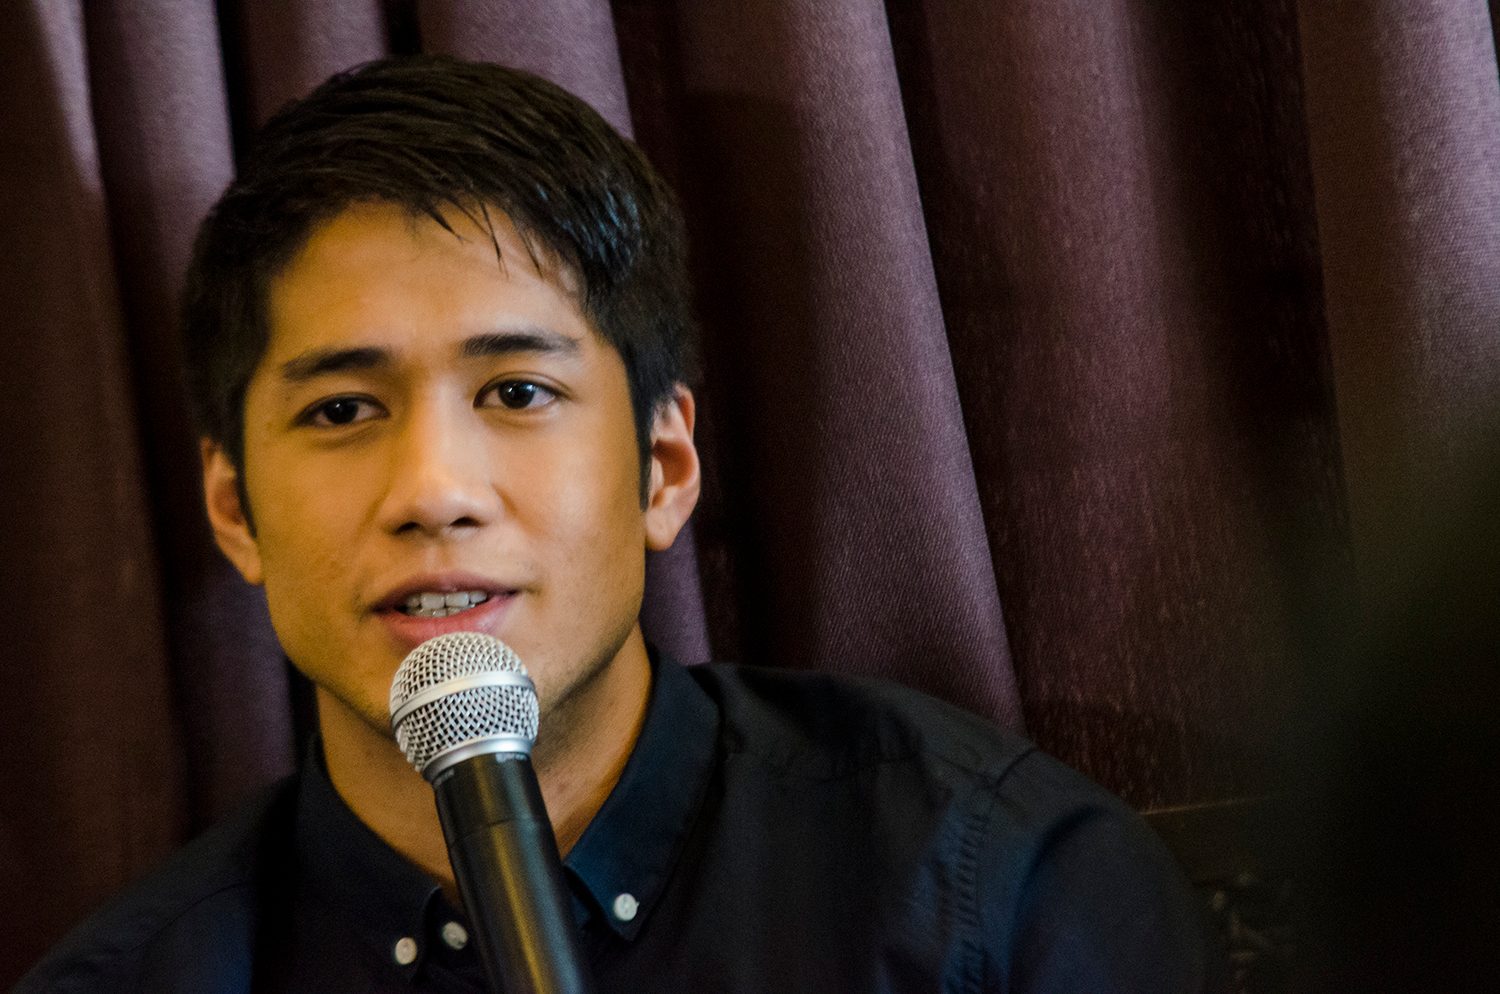 Aljur Abrenica writes sweet message for soon-to-be born son